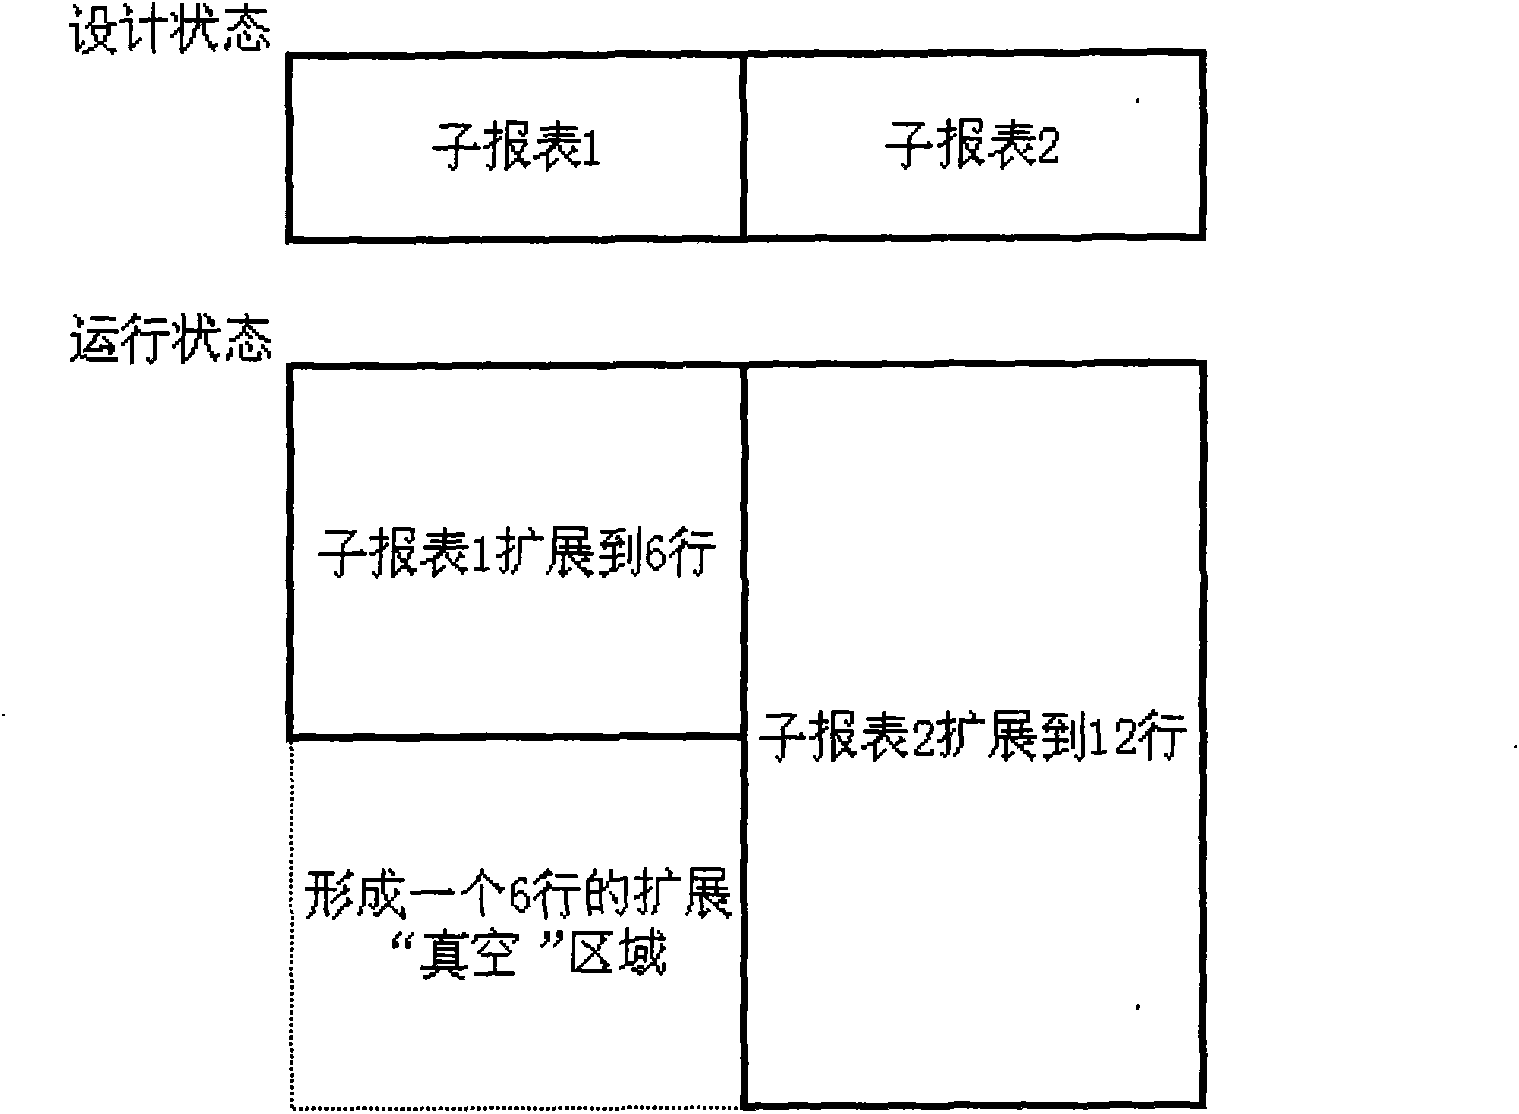 Method and device for importing multi-source data into data template